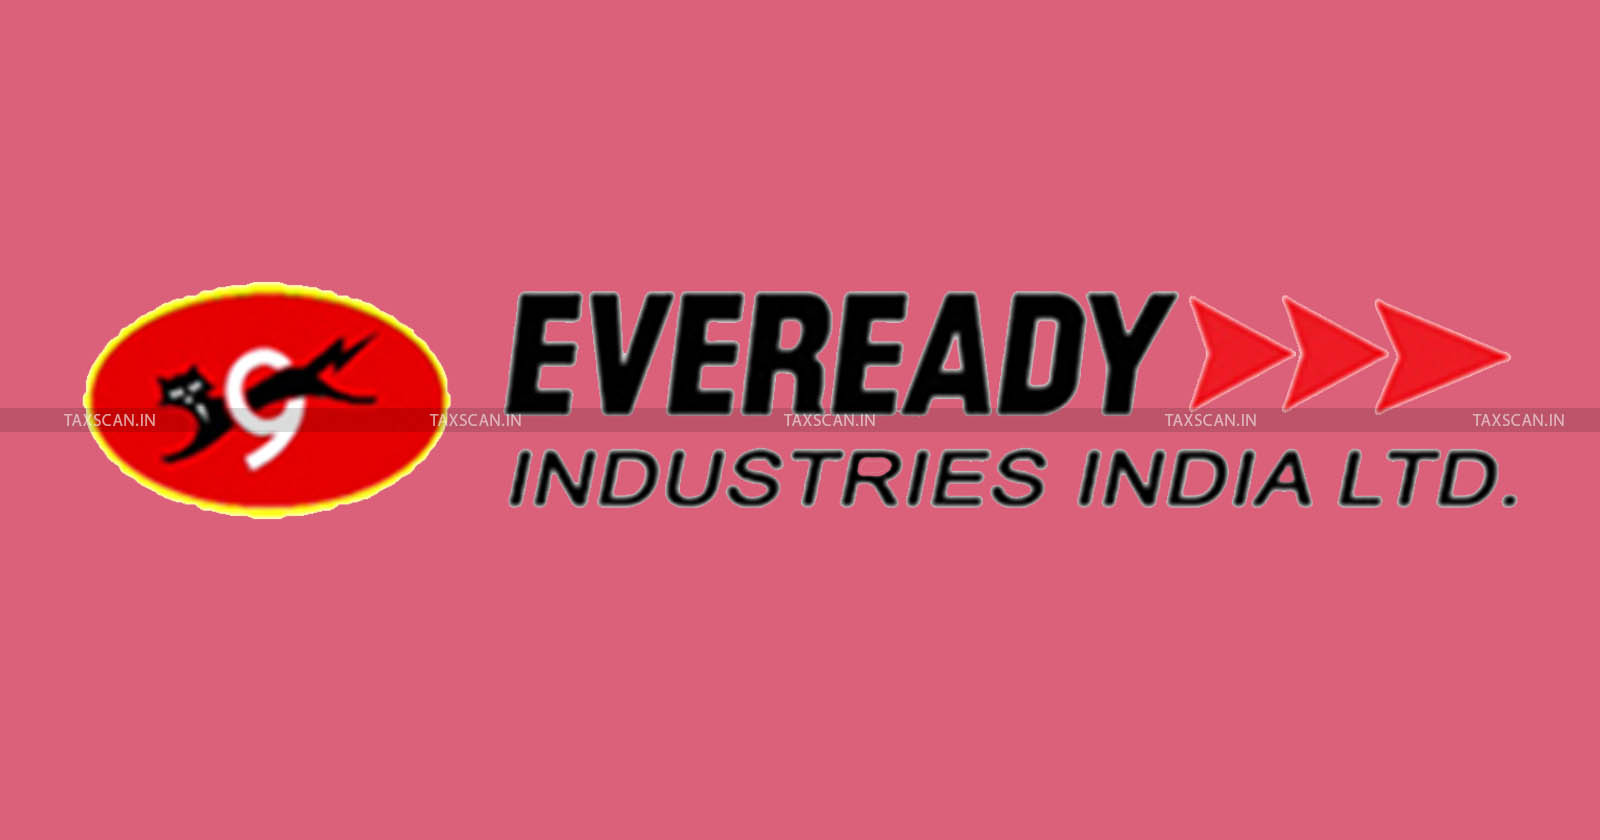 Eveready Industry - Excise Duty Demand - excise duty on Primary Batteries - battery Manufacturing - Excise Duty - Eveready batteries - taxscan